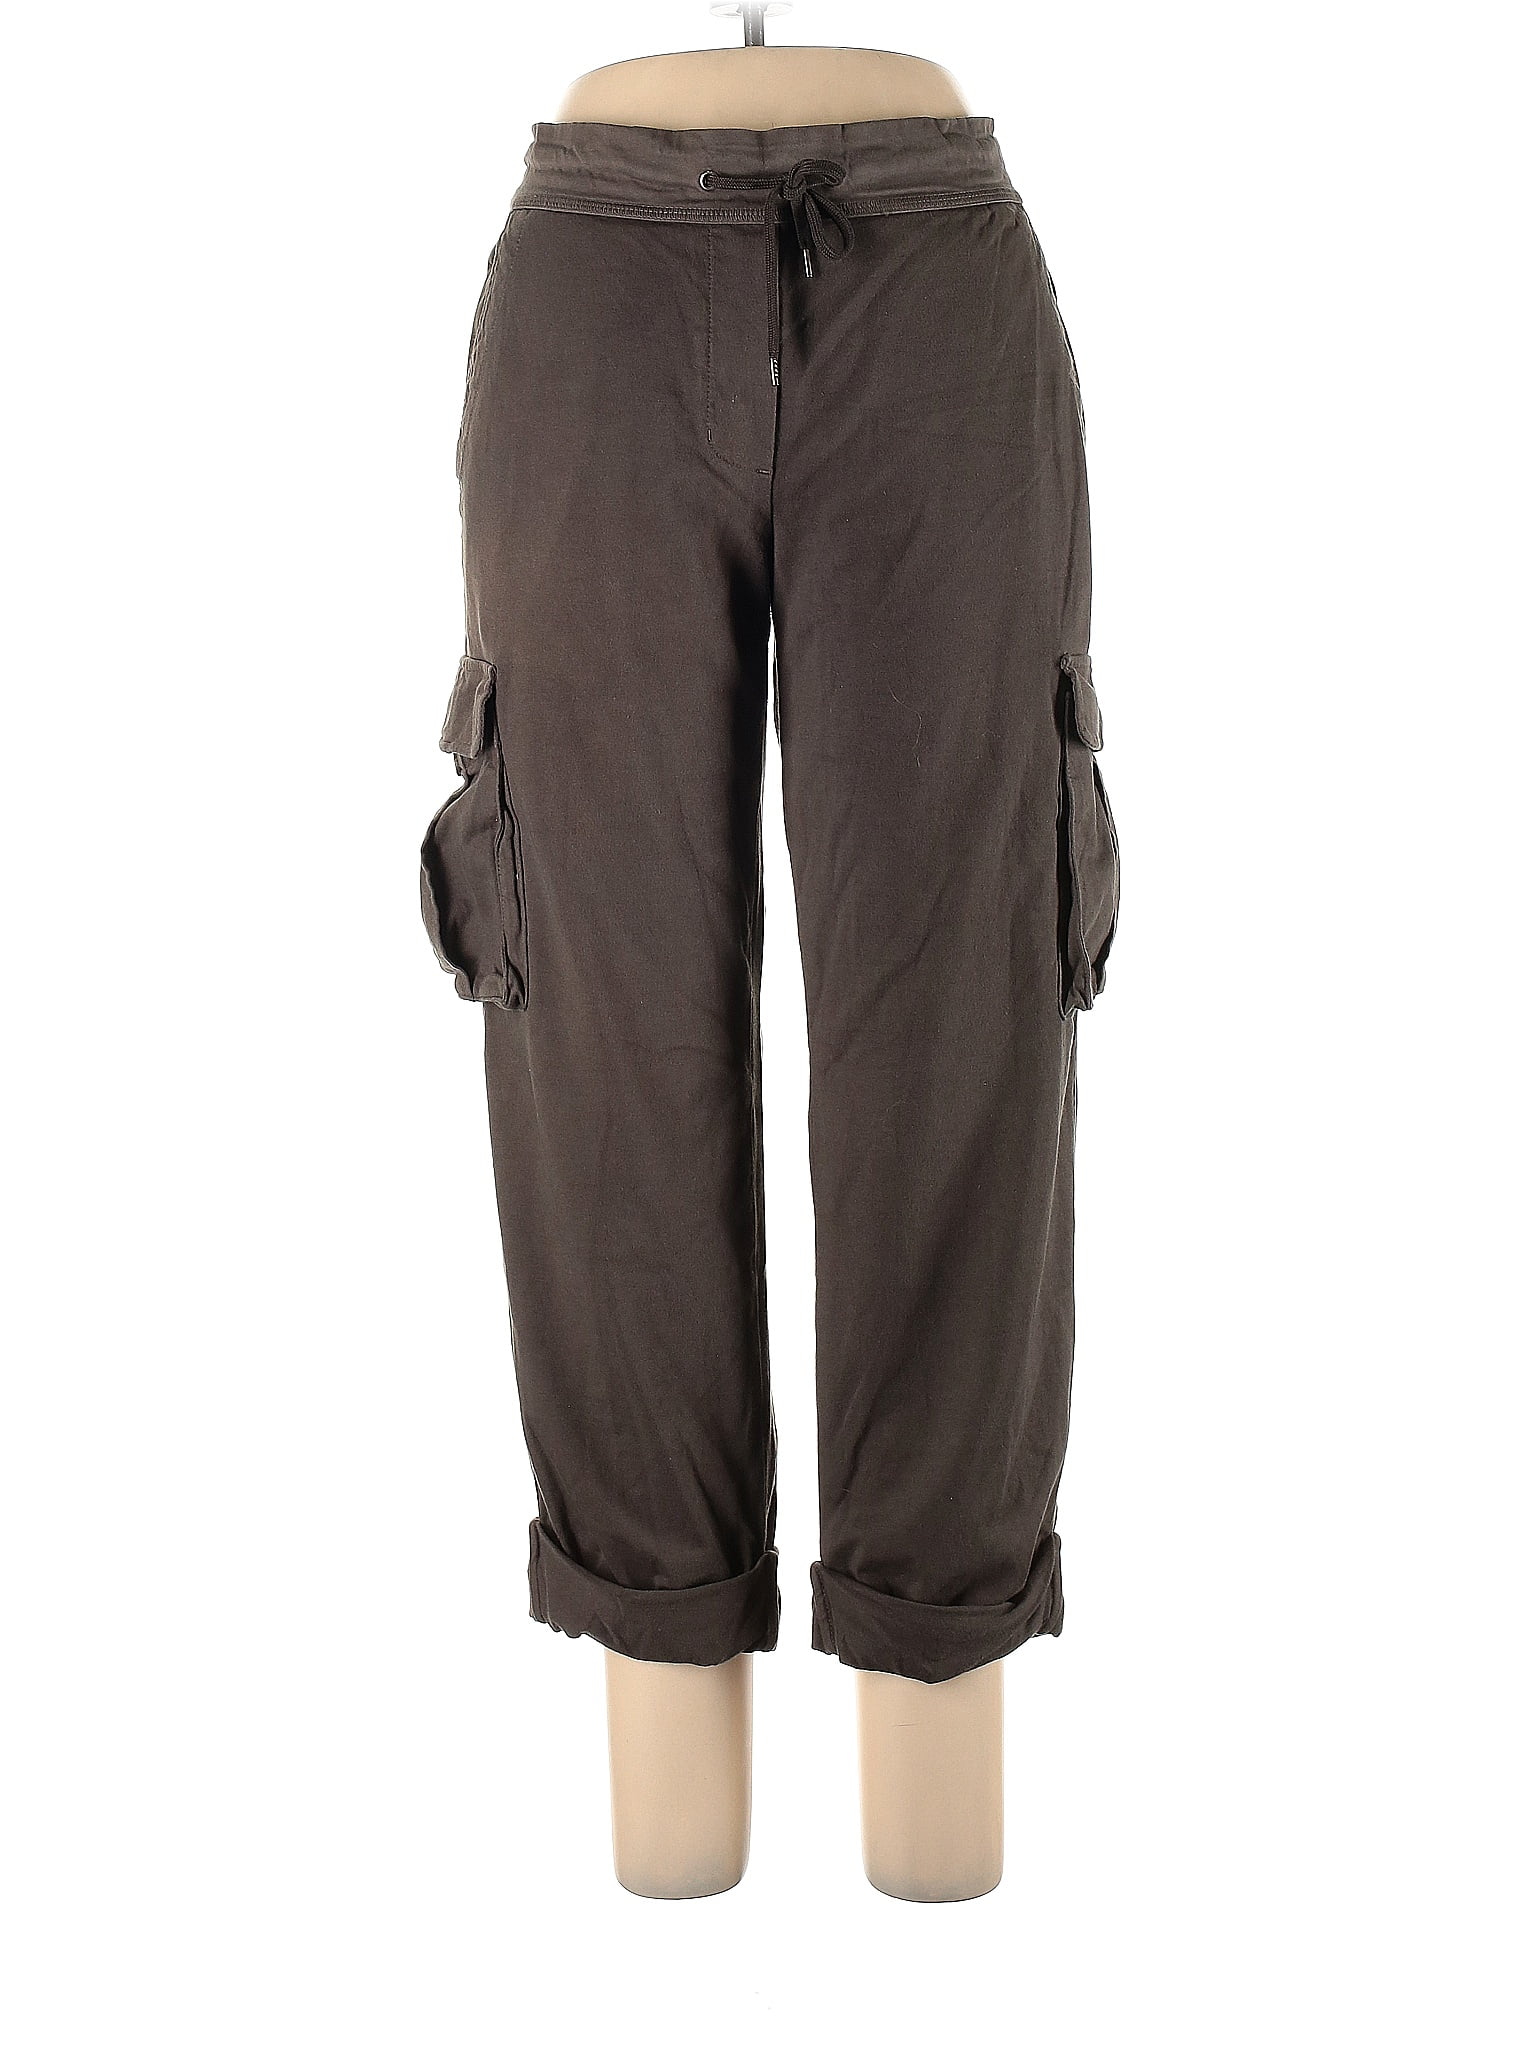 James Perse 100% Supima Cotton Green Cargo Pants Size Lg (3) - 80% off ...